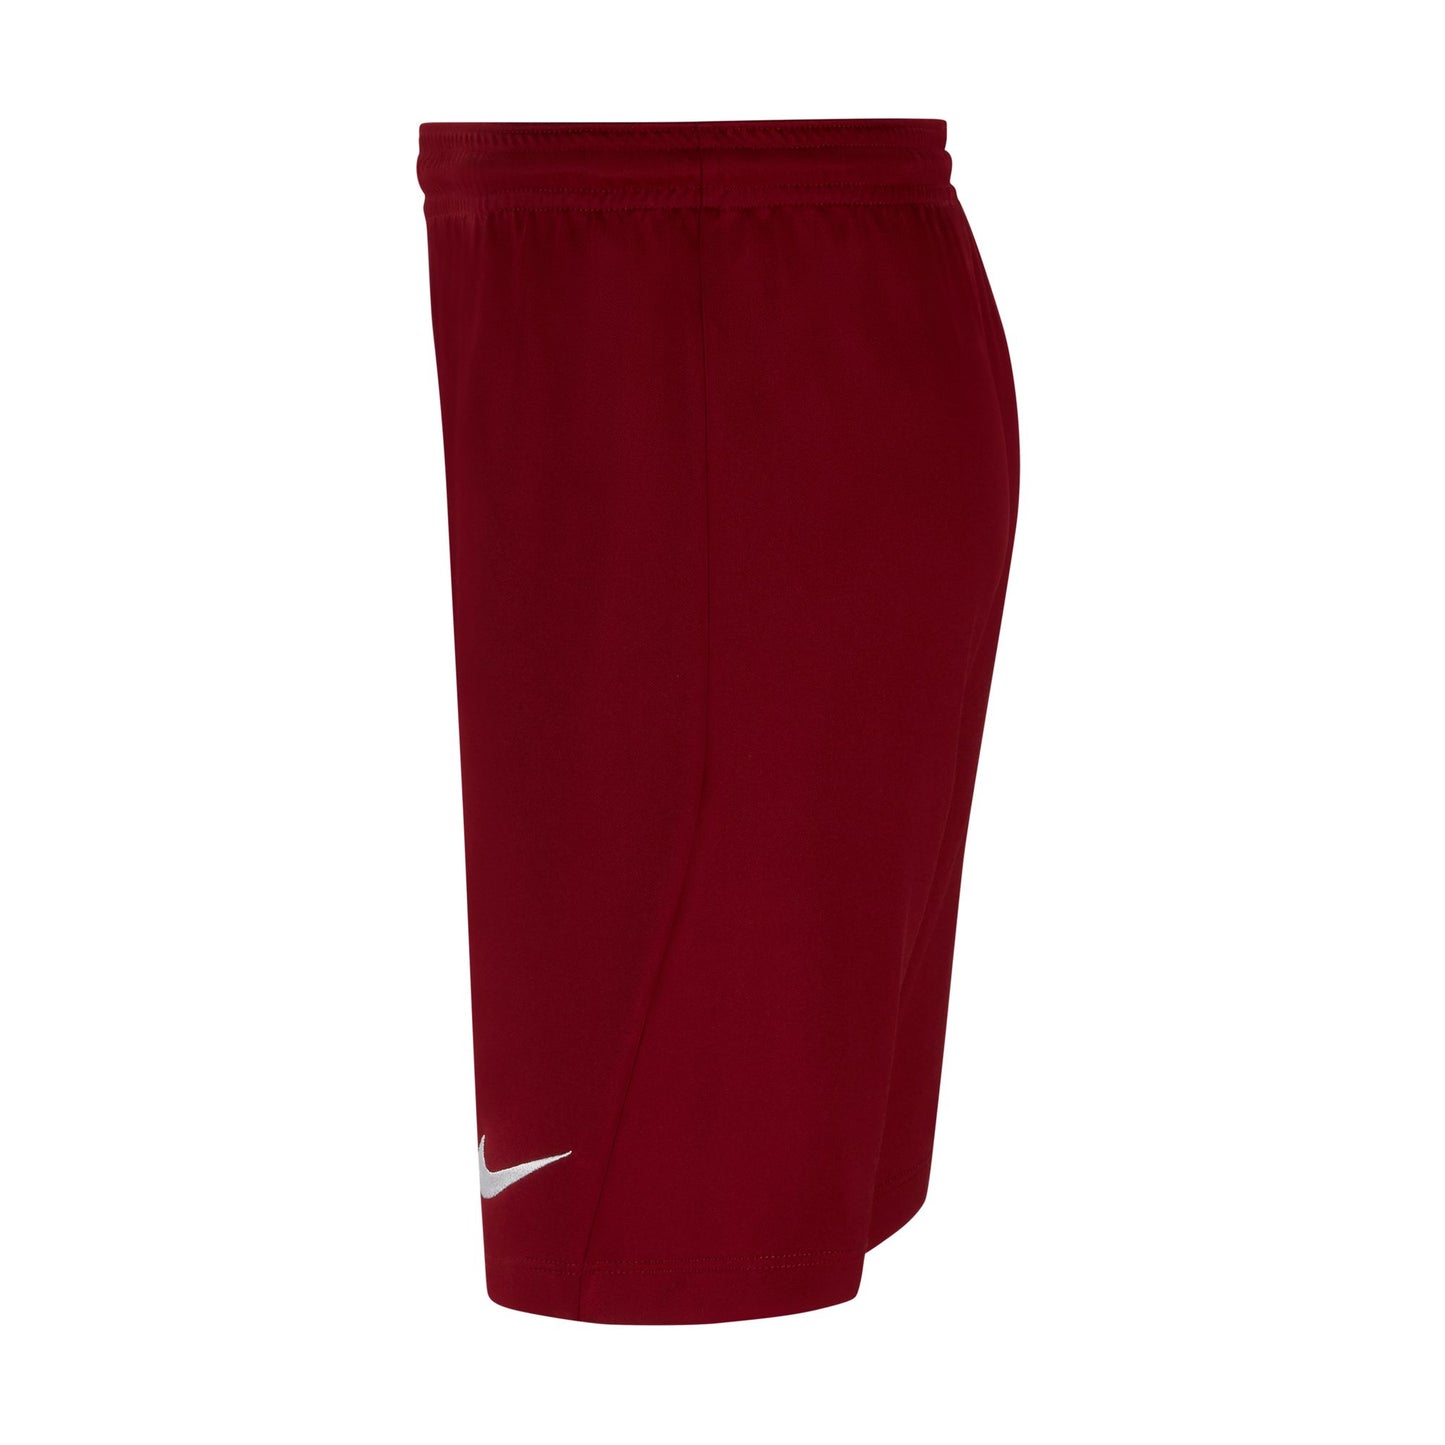 NIKE CLUB PARK III SHORT/TEAM RED - YOUTH'S